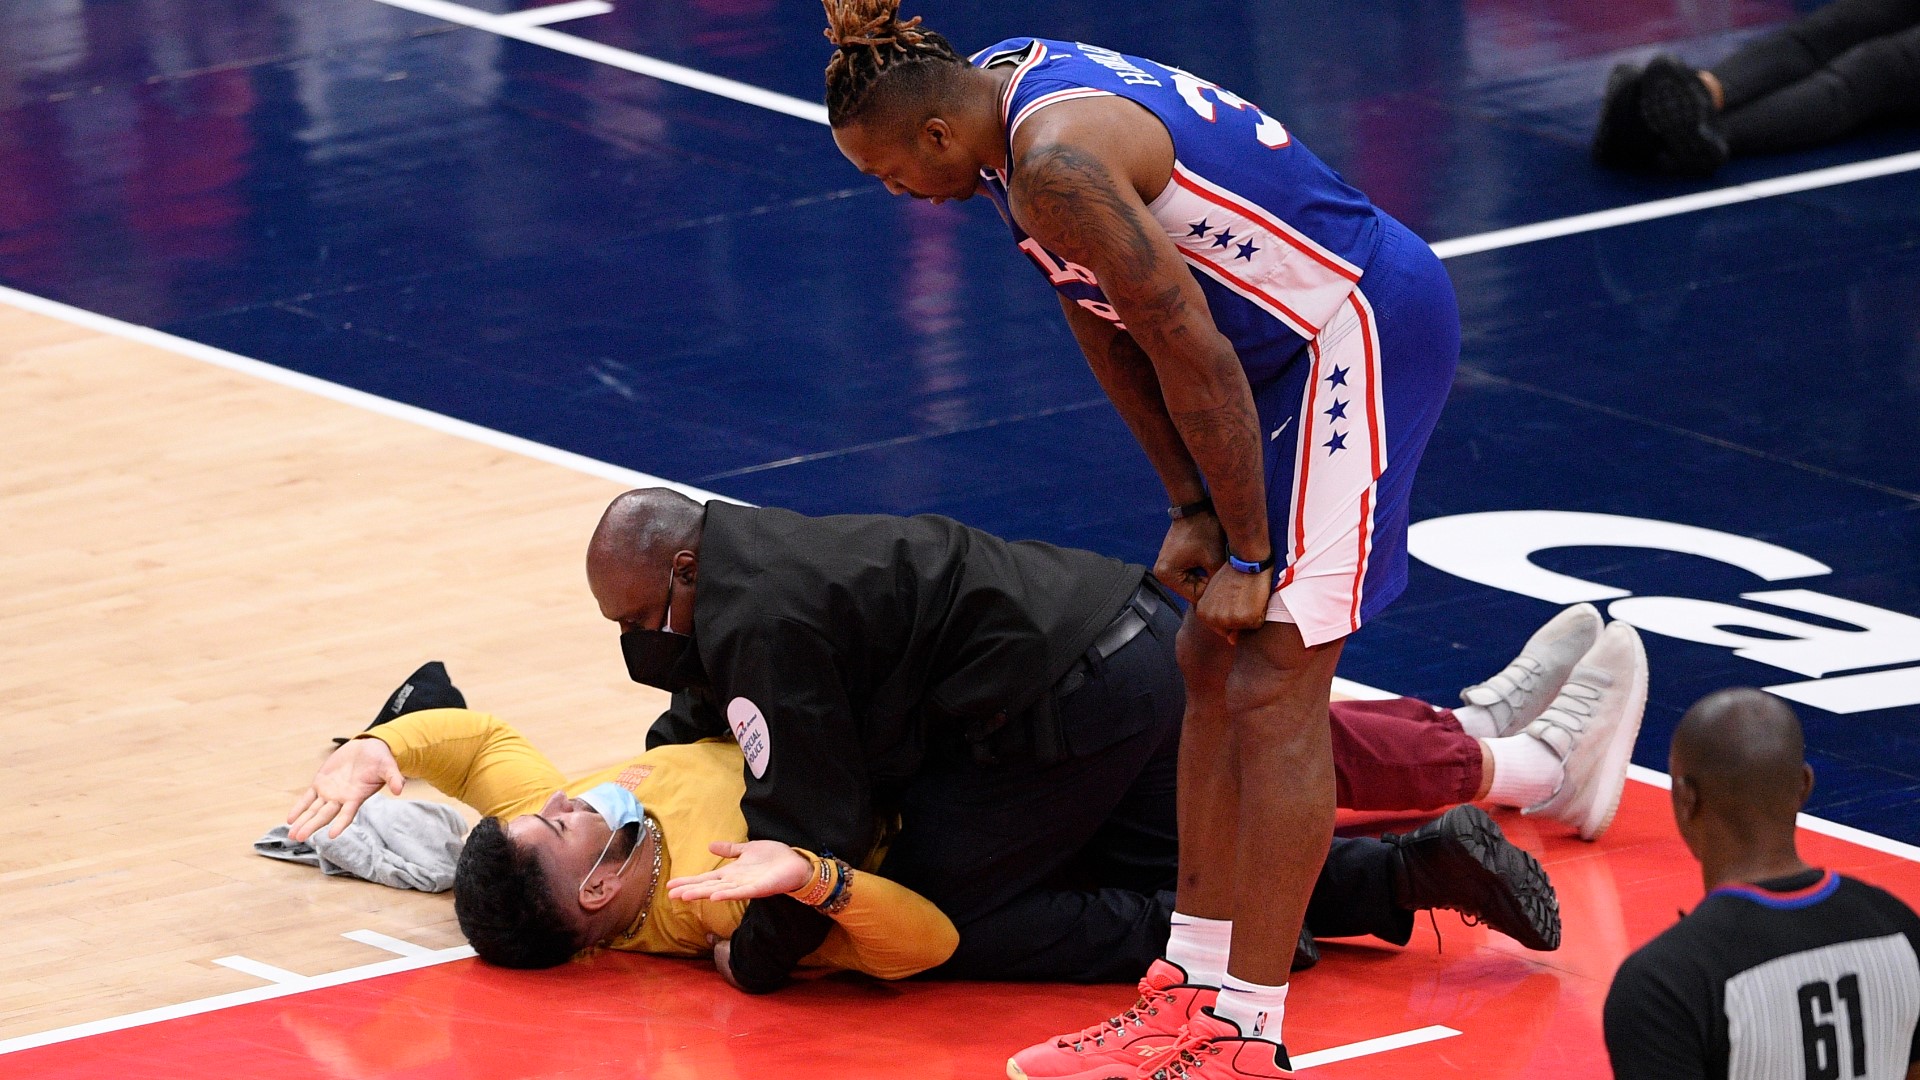 A fan was tackled as he tried to get on the court during an NBA playoff game between the Wizards and 76ers on Monday night.